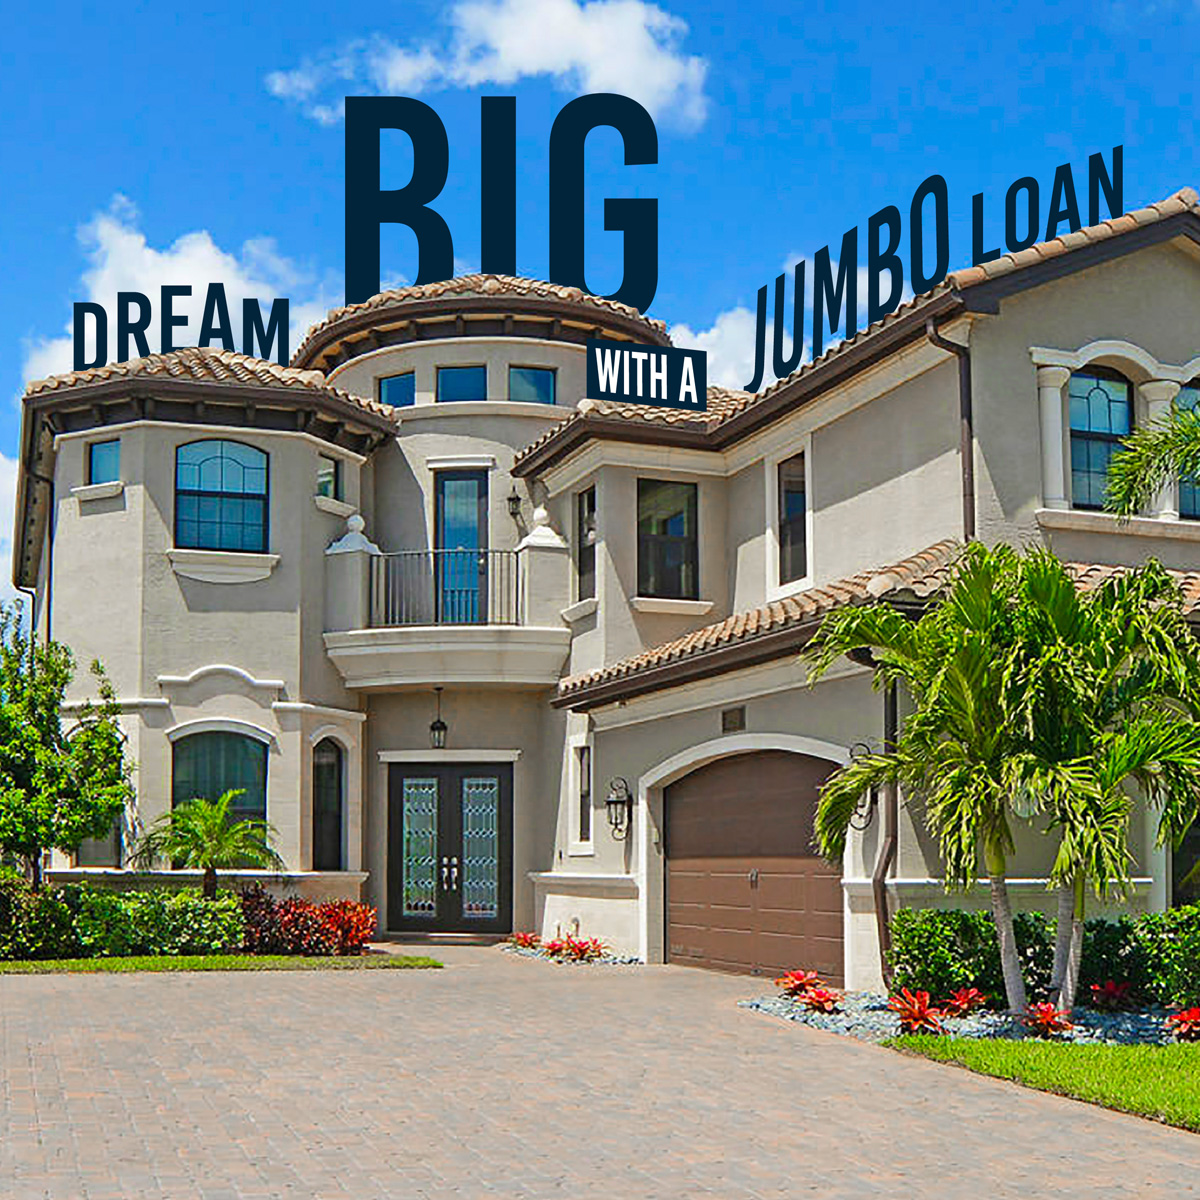 Big dreams need big loans! Jumbo loans can help turn your luxury home dreams into reality. Let's chat today!